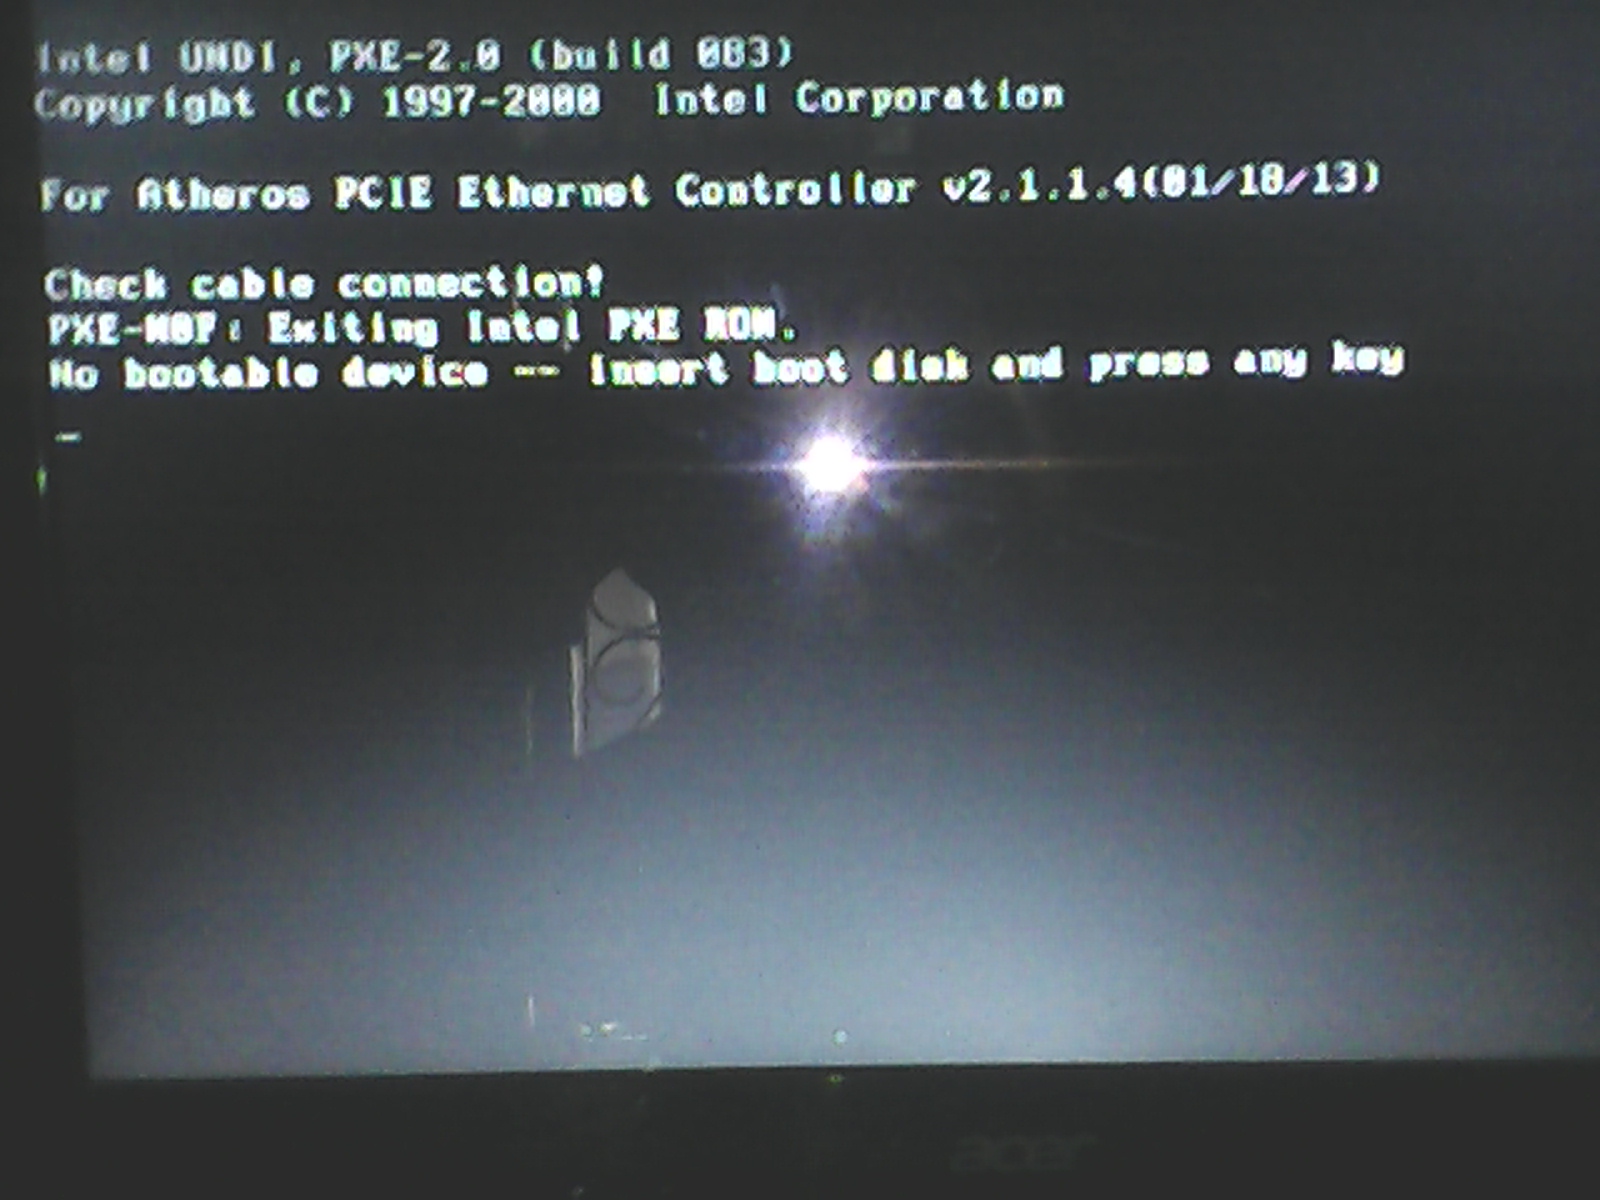 No Bootable device Insert Boot Disk and Press any Key на ноутбуке. Disk Boot failure Insert System Disk and Press enter. No Bootable device Божья коровка. No Bootable device Insert Boot Disk and Press any Key перевод на русский. No bootable system